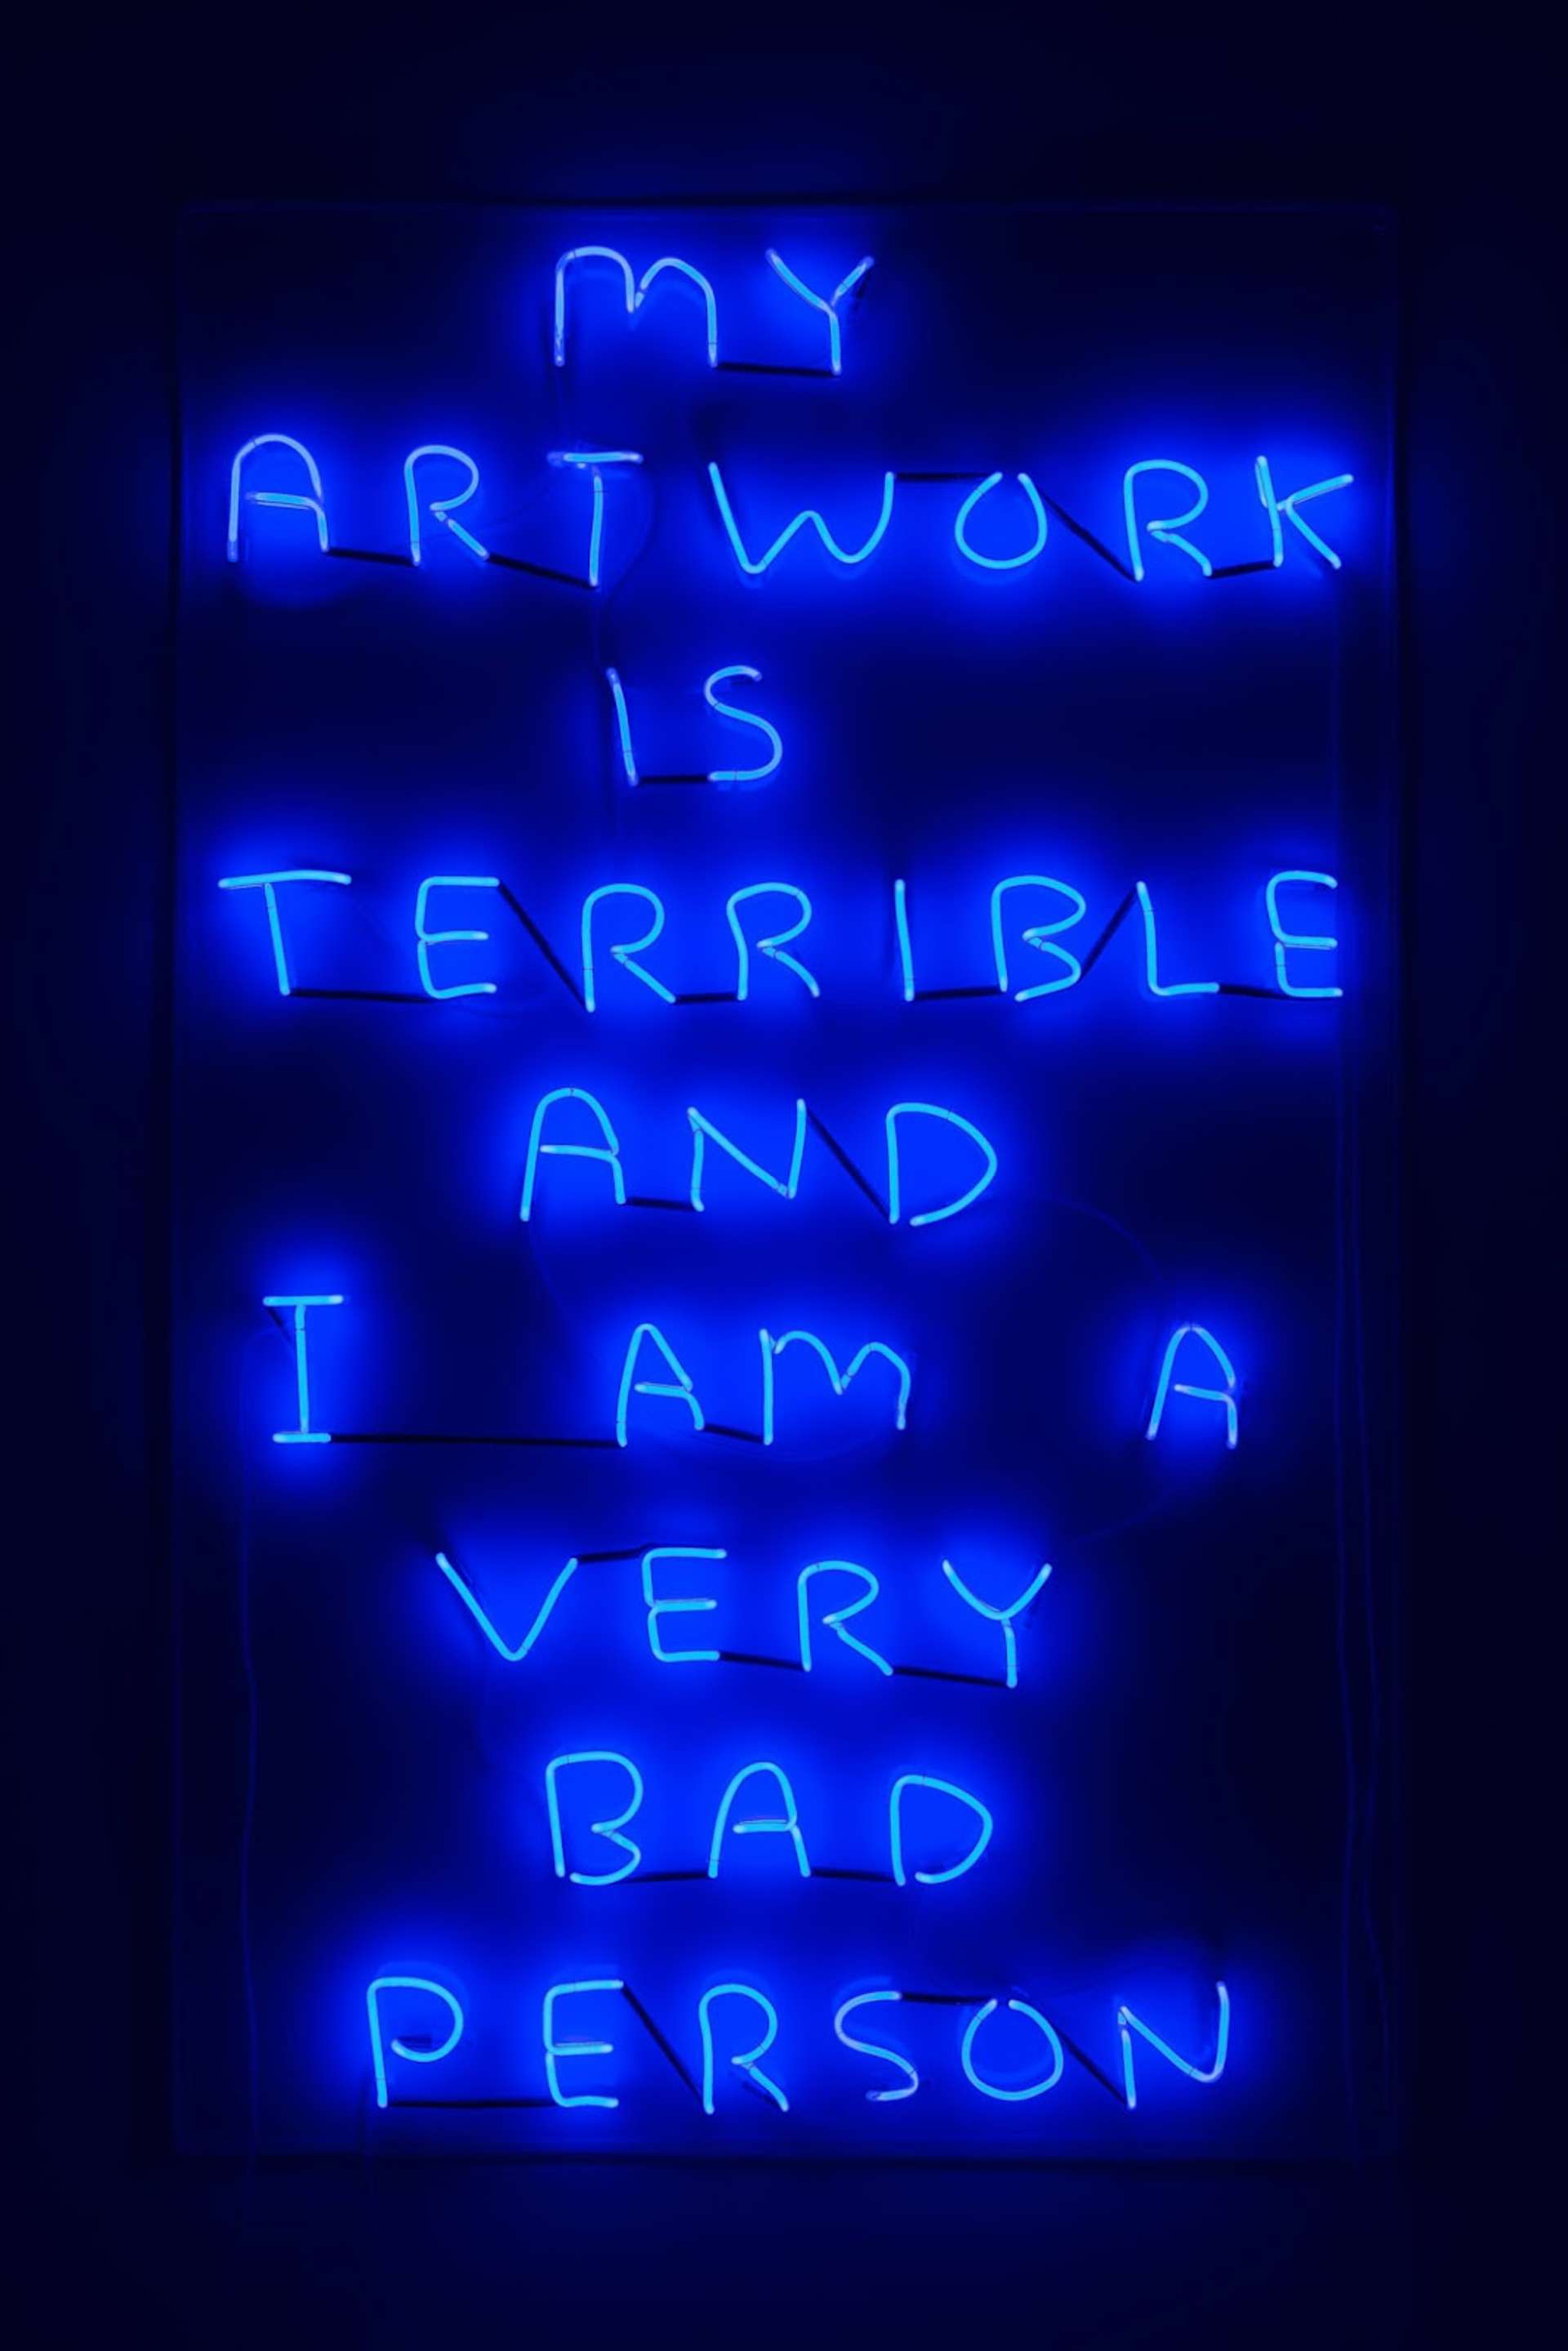 An image of the neon sign My Artwork by artist David Shrigley, a blue neon which reads “My artwork is terrible and I am a very bad person.”